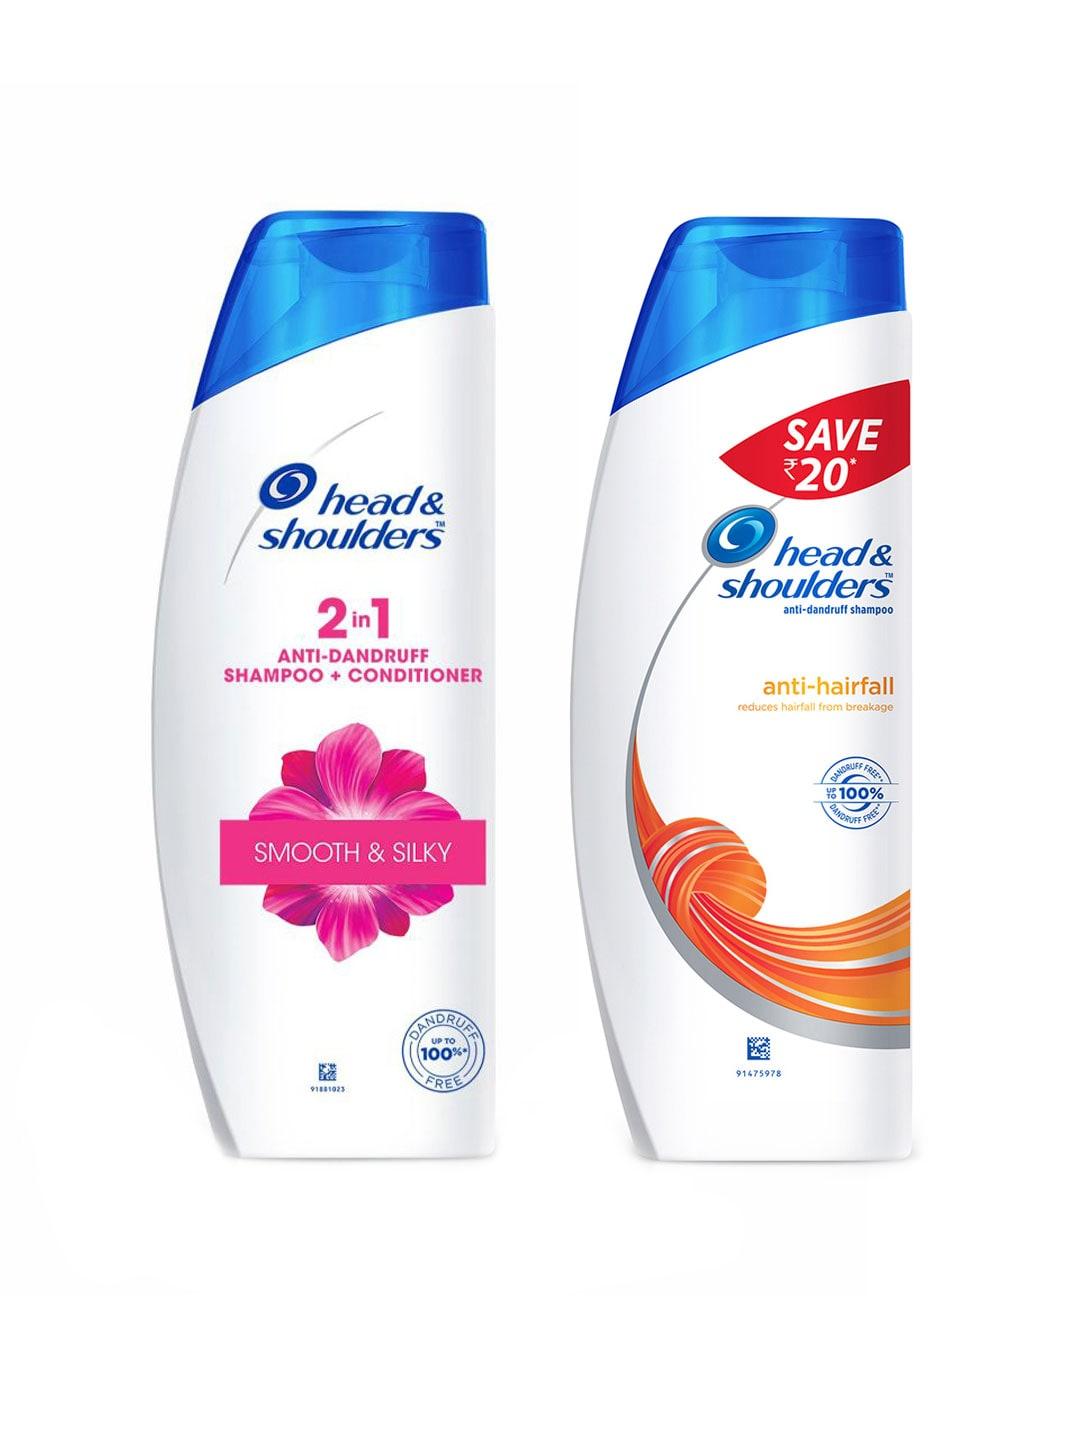 head-&-shoulders-set-of-smooth-&-silky-2-in-1-shampoo-&-conditioner-anti-hairfall-shampoo